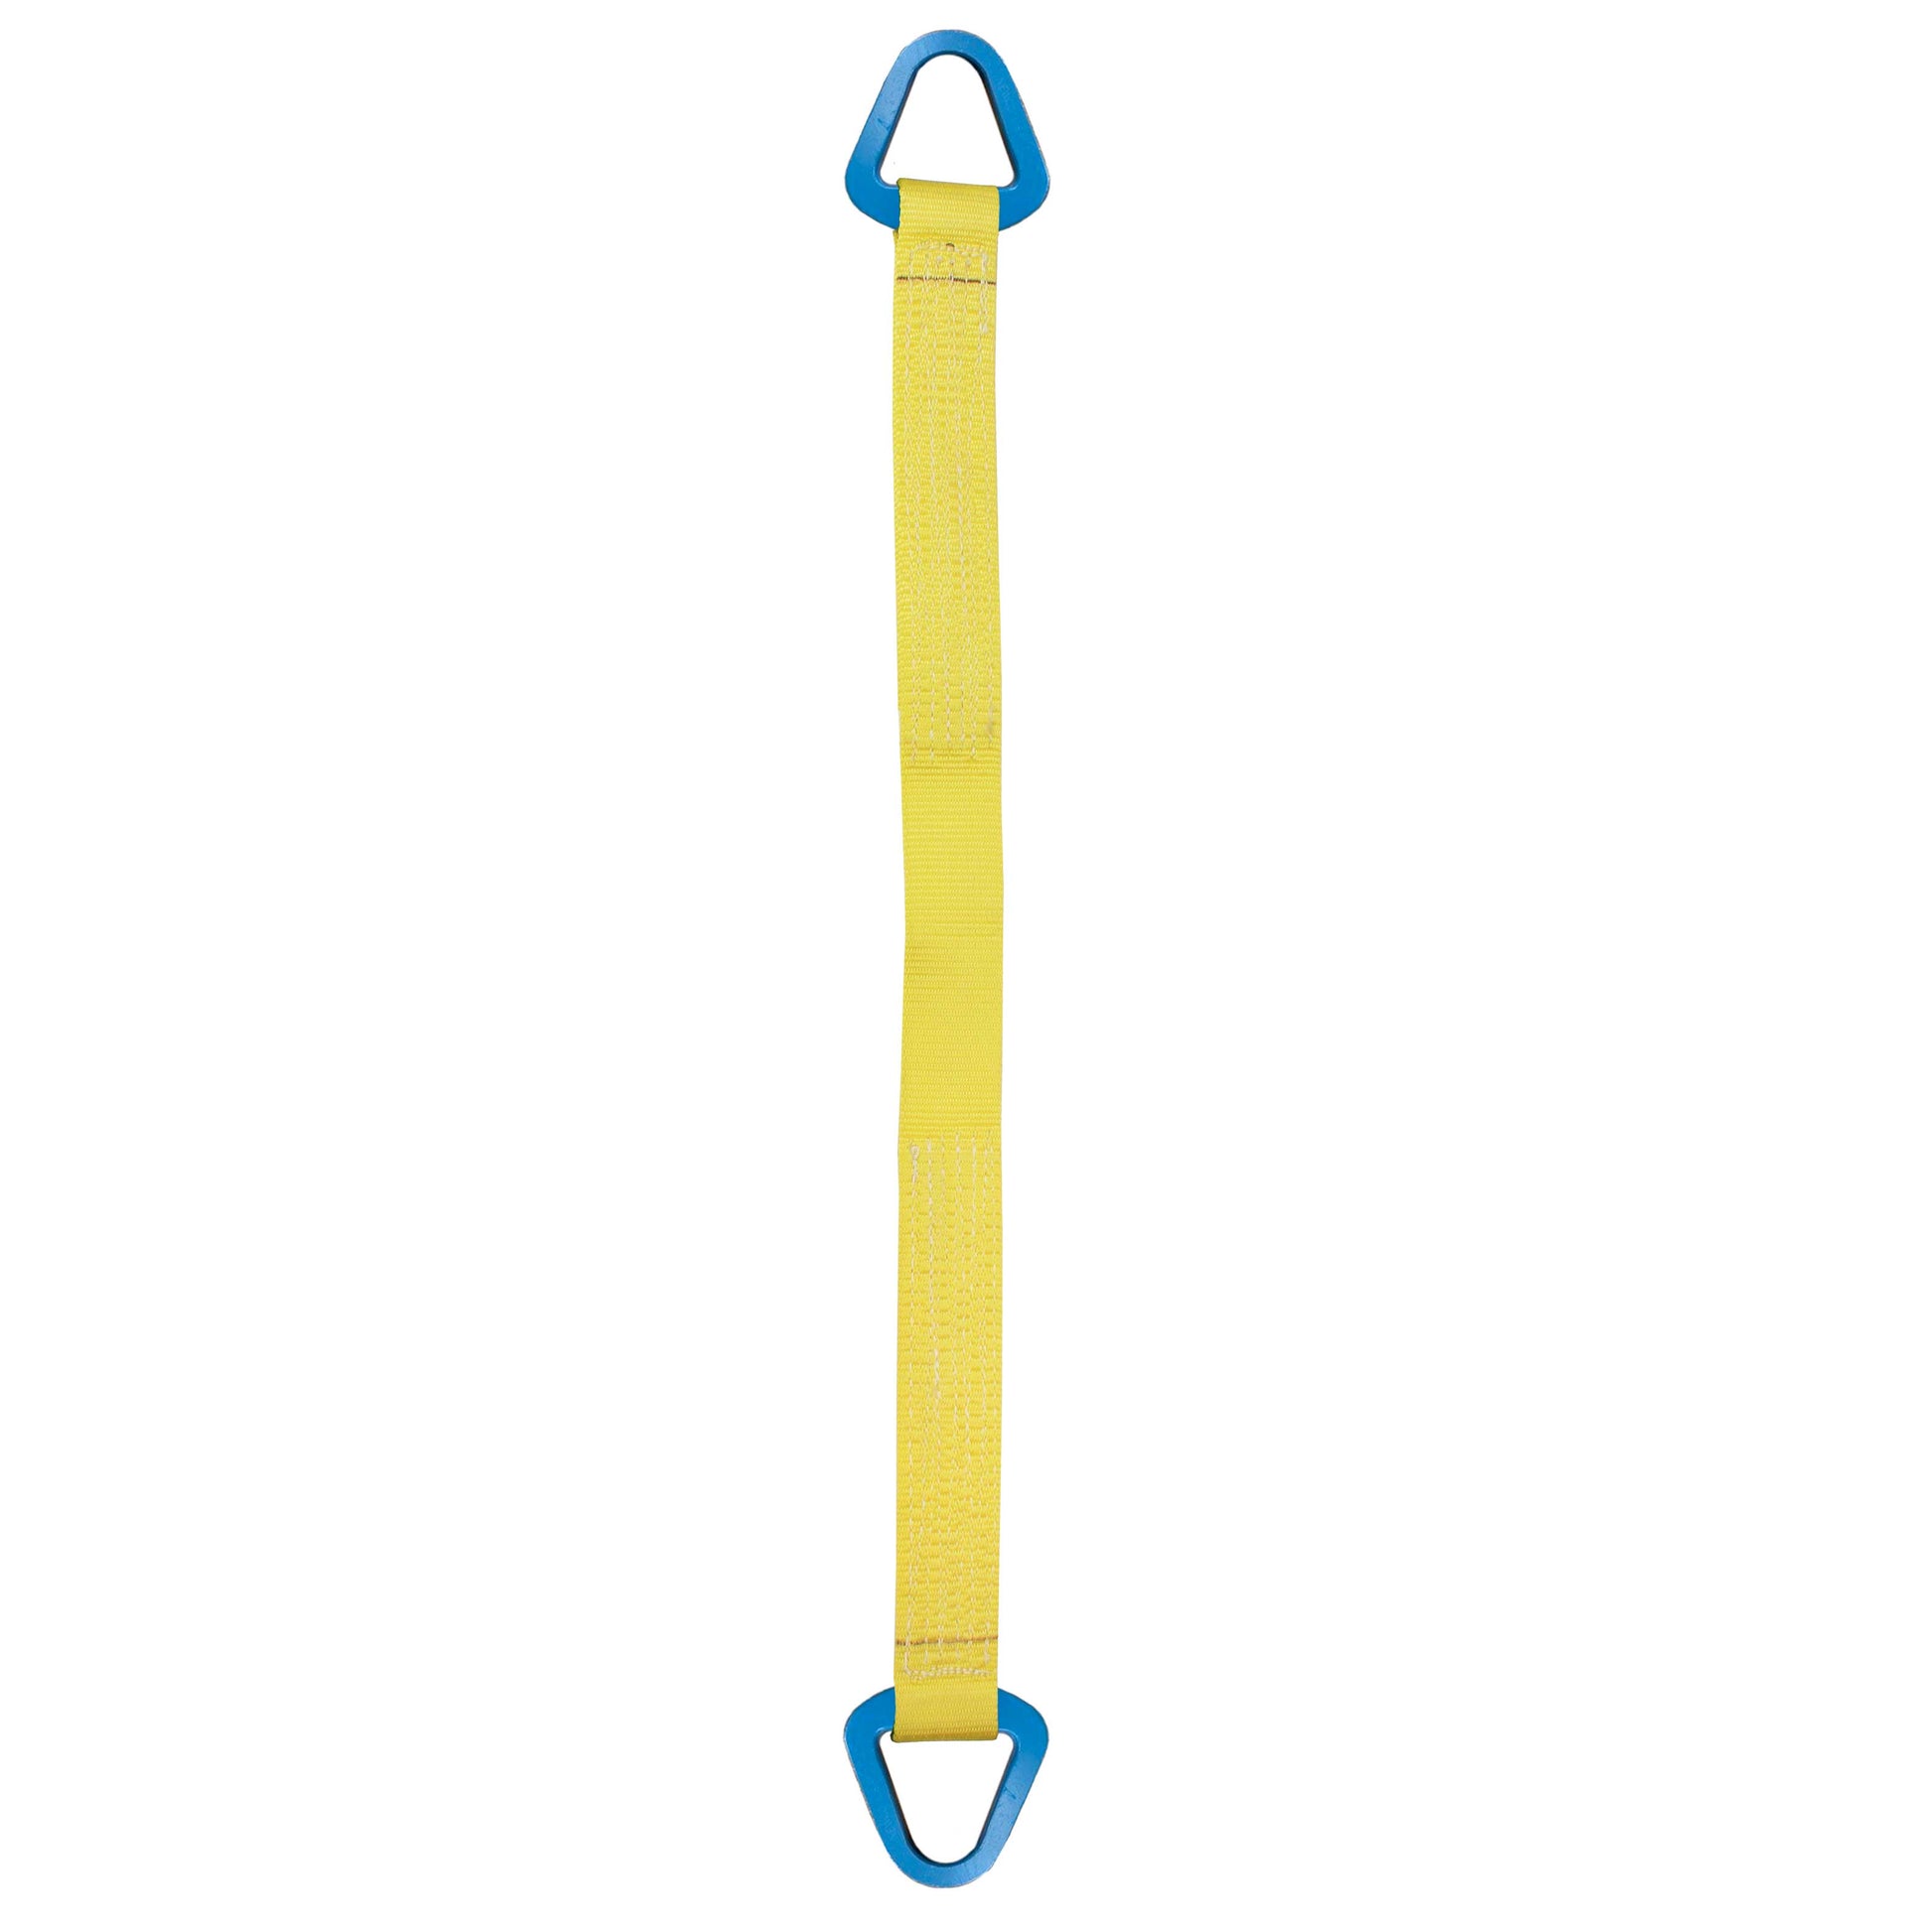 Nylon Lifting Sling Triangle 8 inch x 12 foot 1ply image 1 of 2